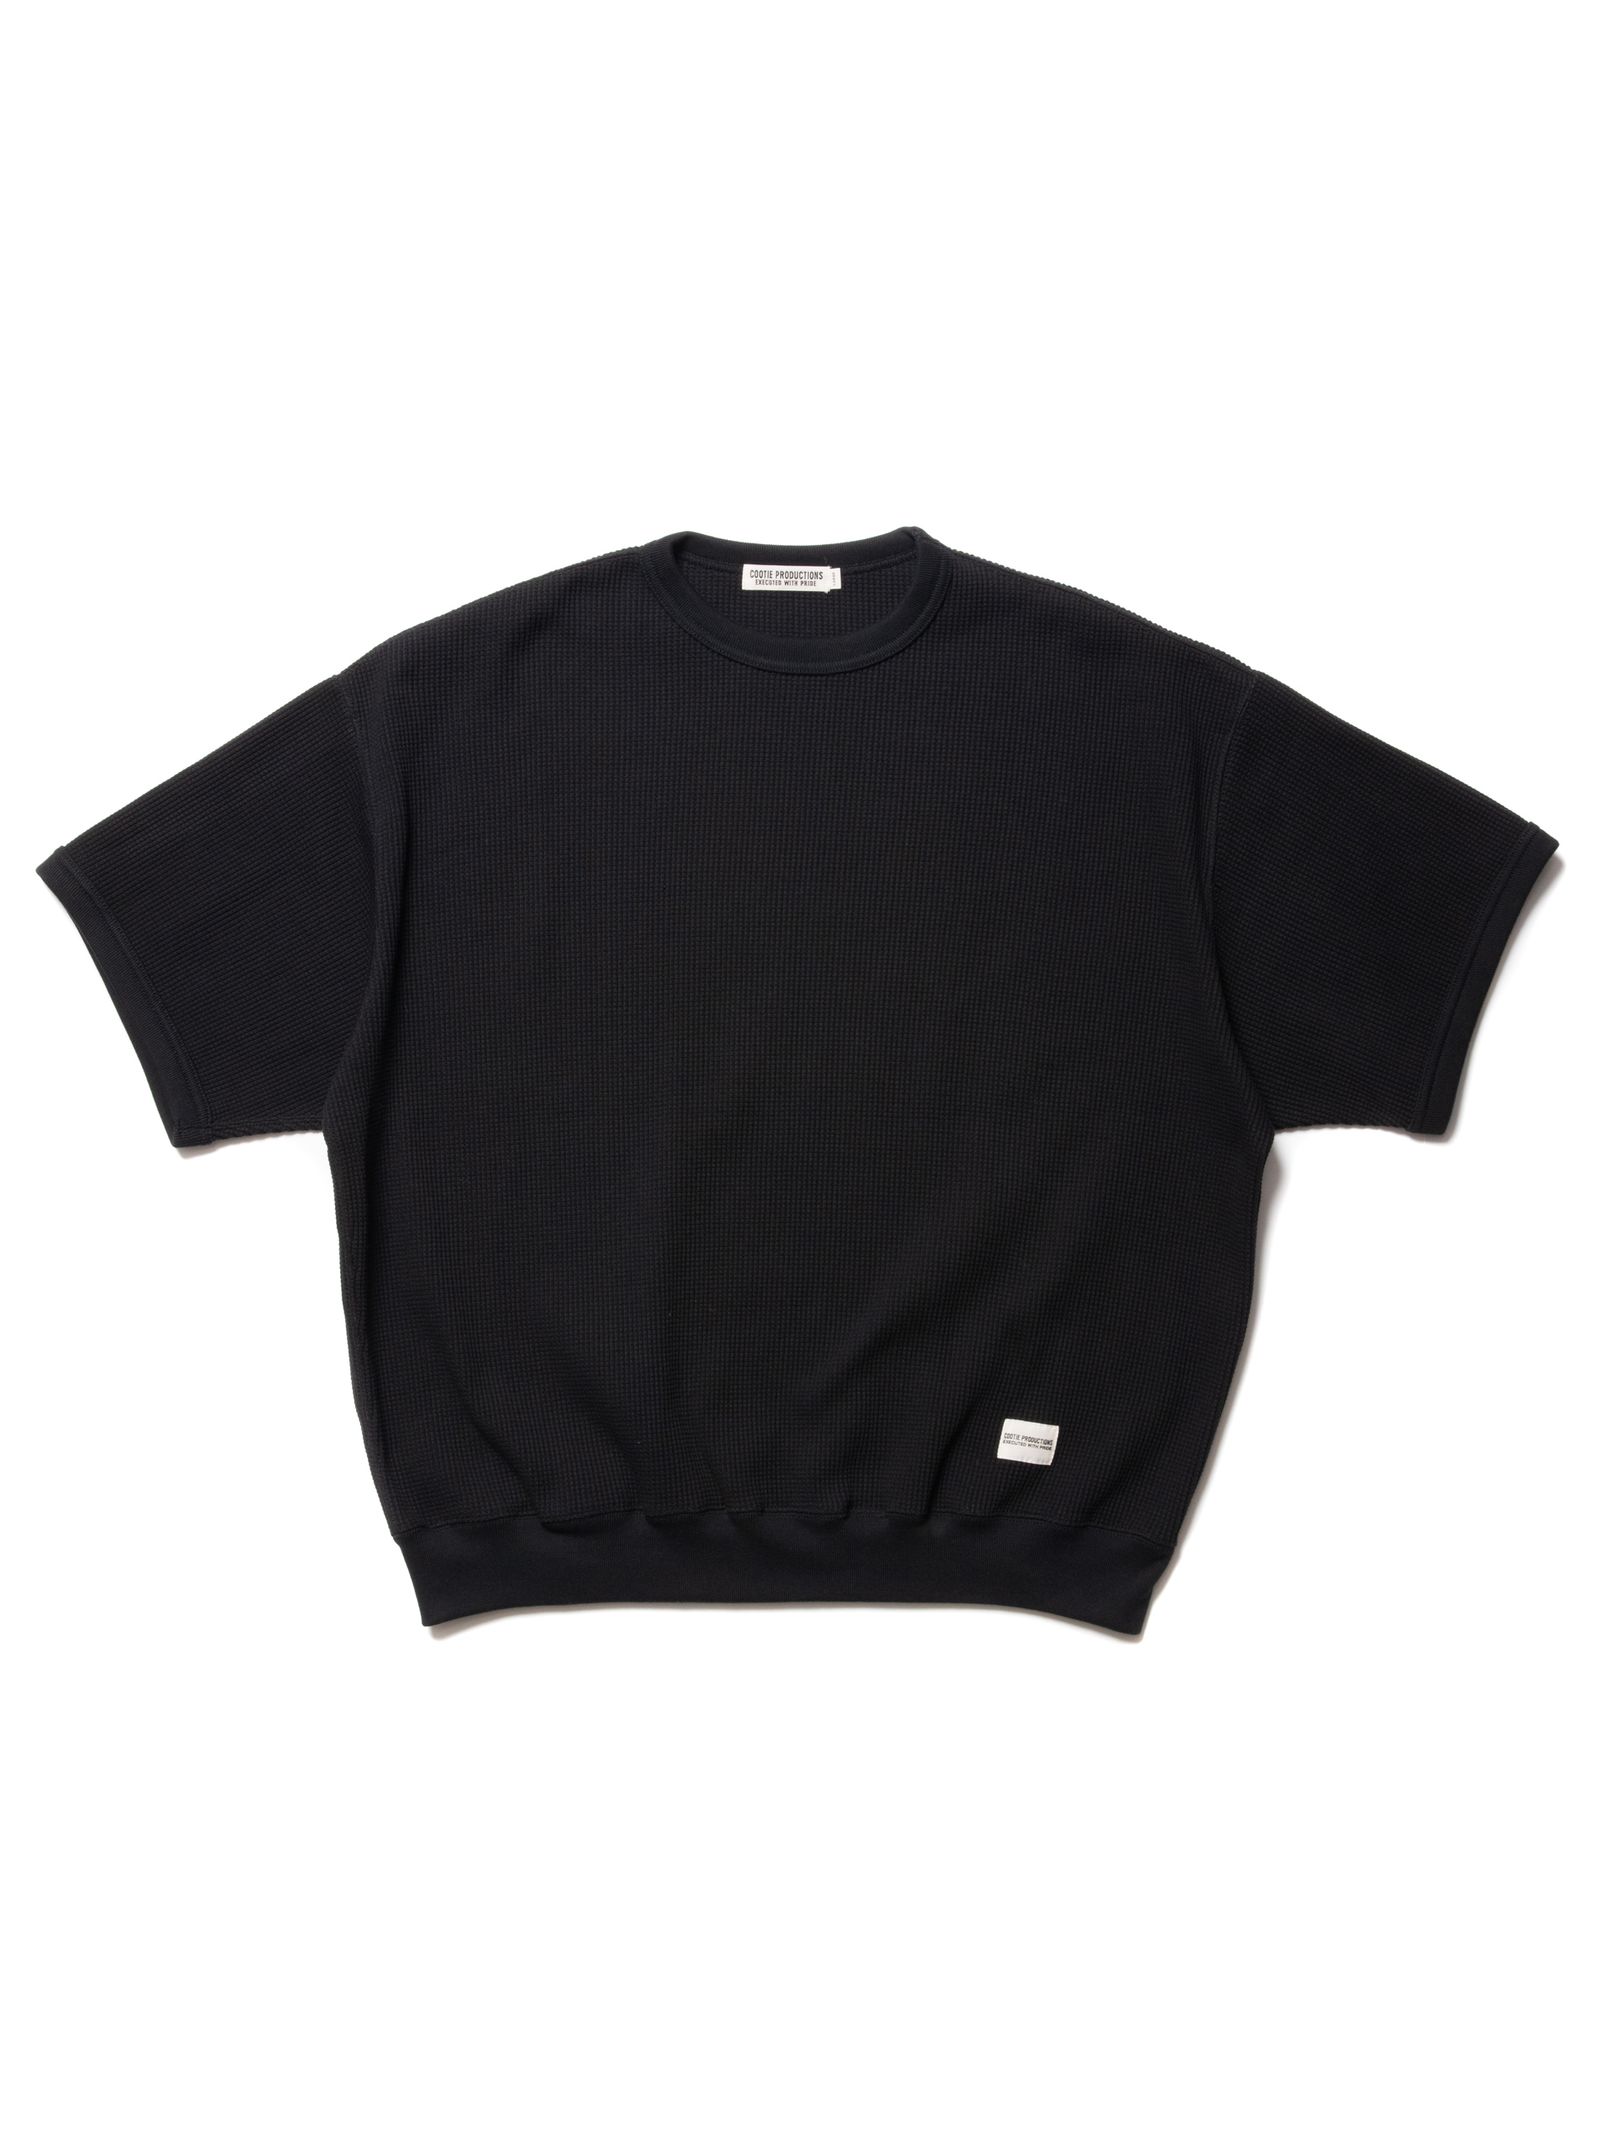 COOTIE PRODUCTIONS - Suvin Waffle S/S Crew (BROWN) / ワッフル ...